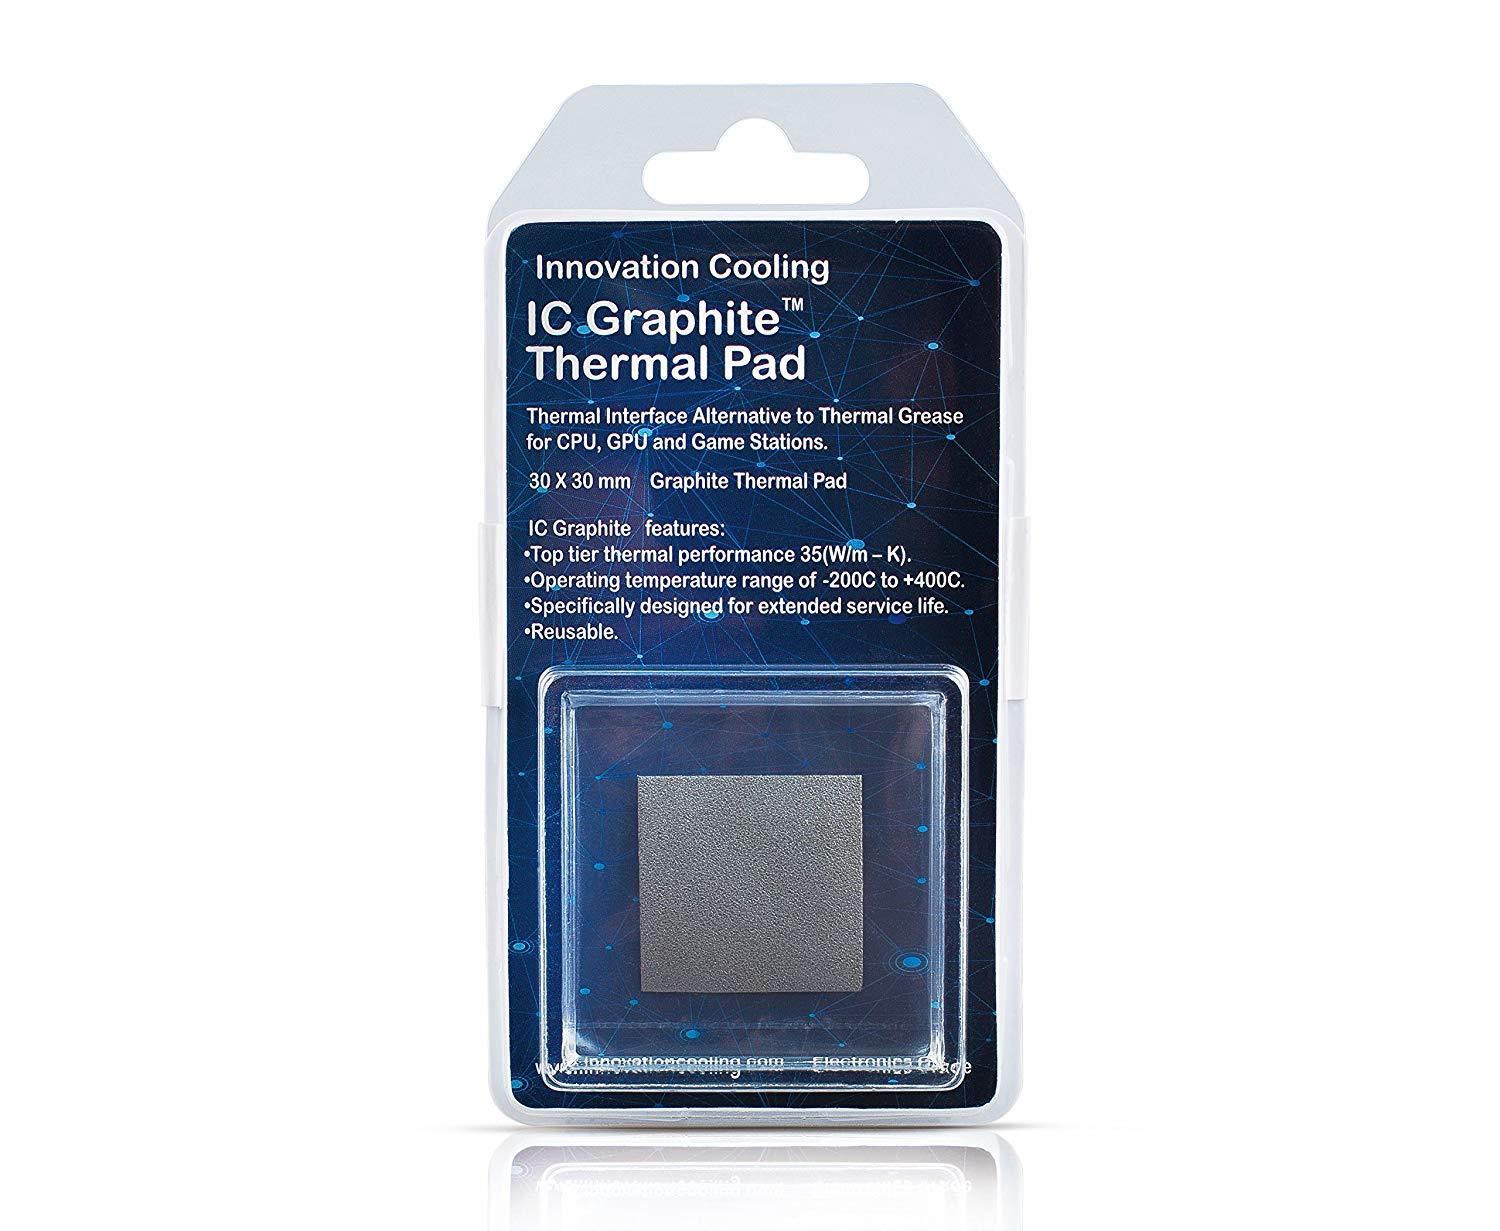 Innovation Cooling Graphite Thermal Pad - 30x30mm - Store 974 | ستور ٩٧٤